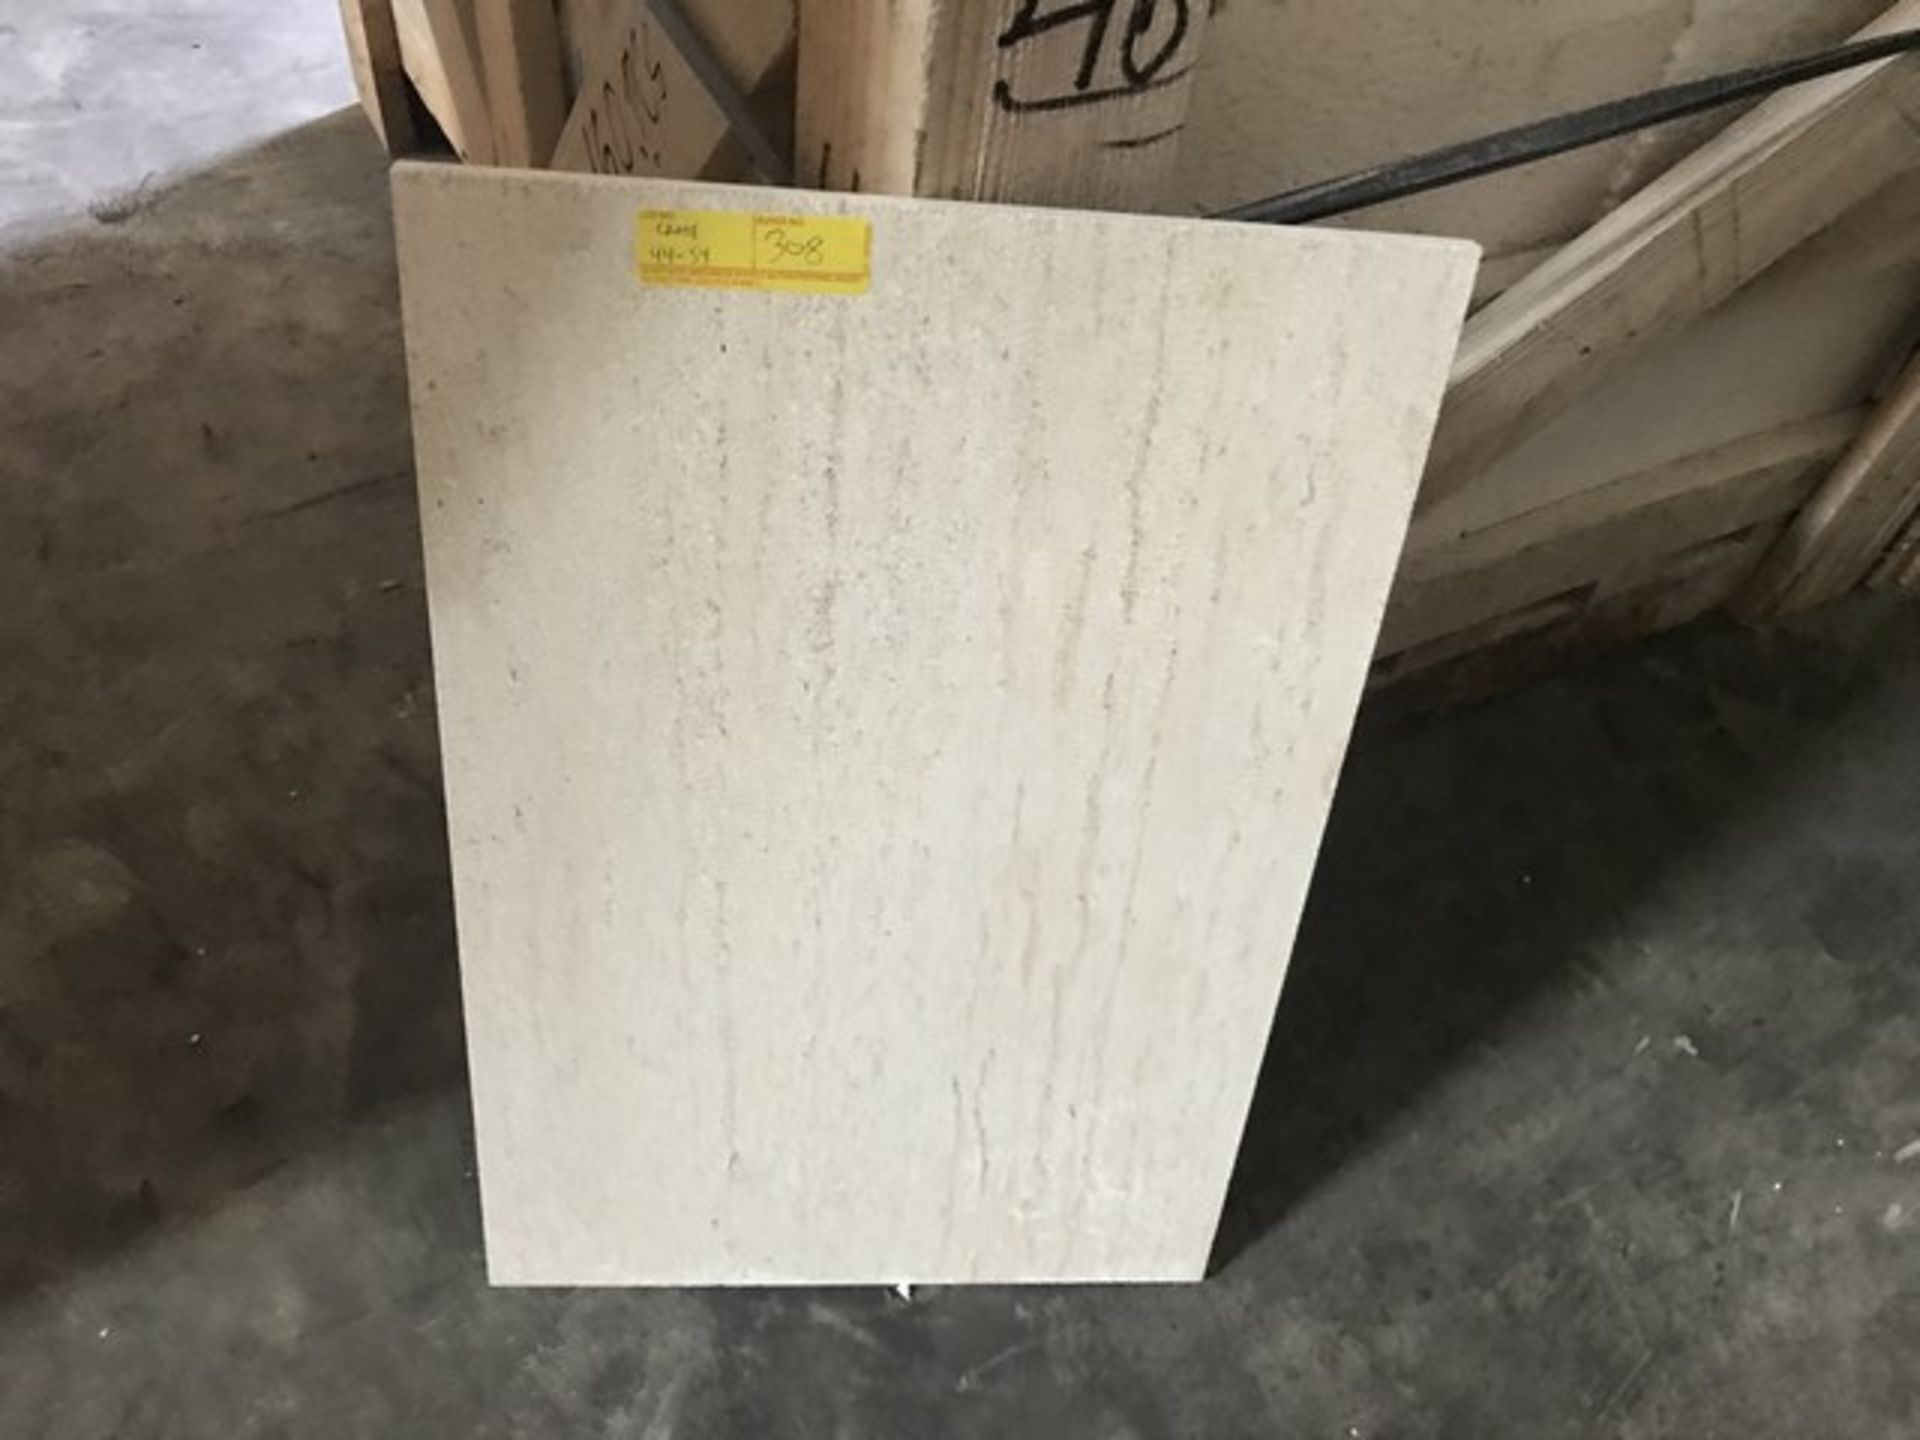 SQ.FT. - HONED VEIN CUT MARBLE - 16'' x 24'' x 7/16'' - 136 PIECES / 363.12 SQ.FT. (CRATE #53)